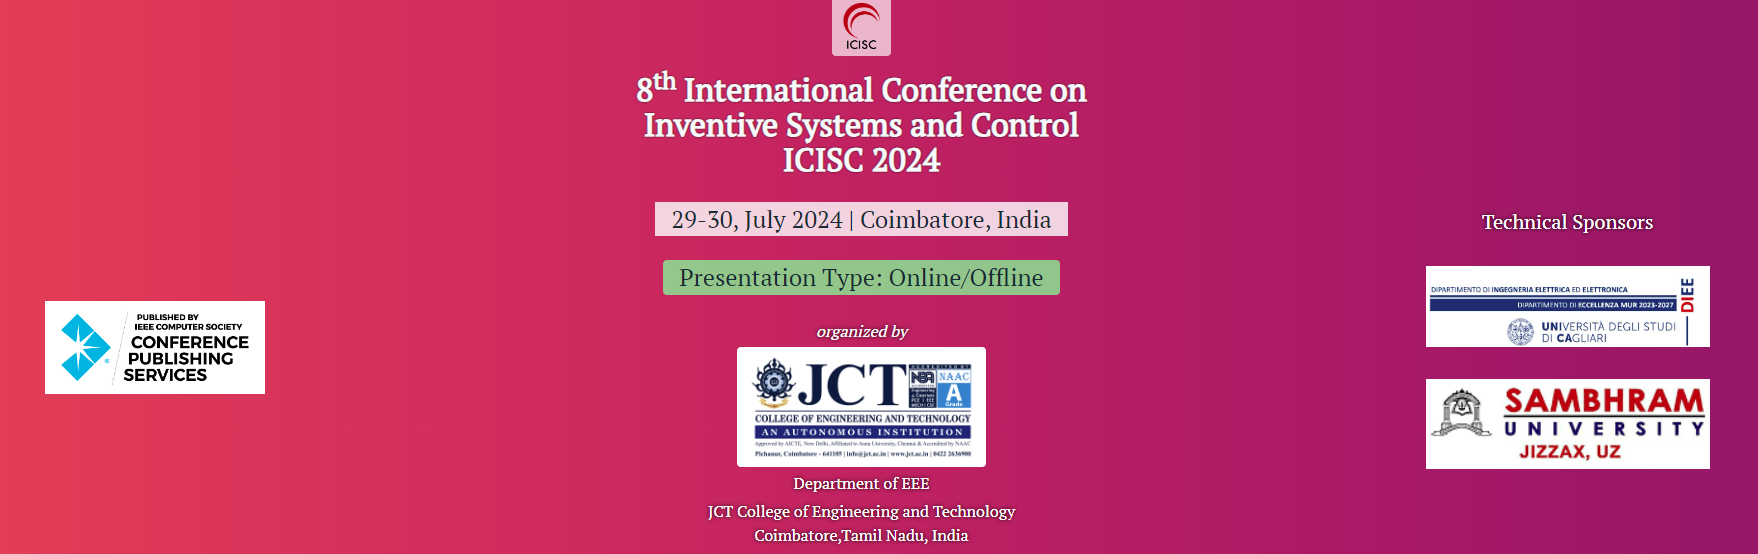 8th International Conference on Inventive Systems and Control 2024